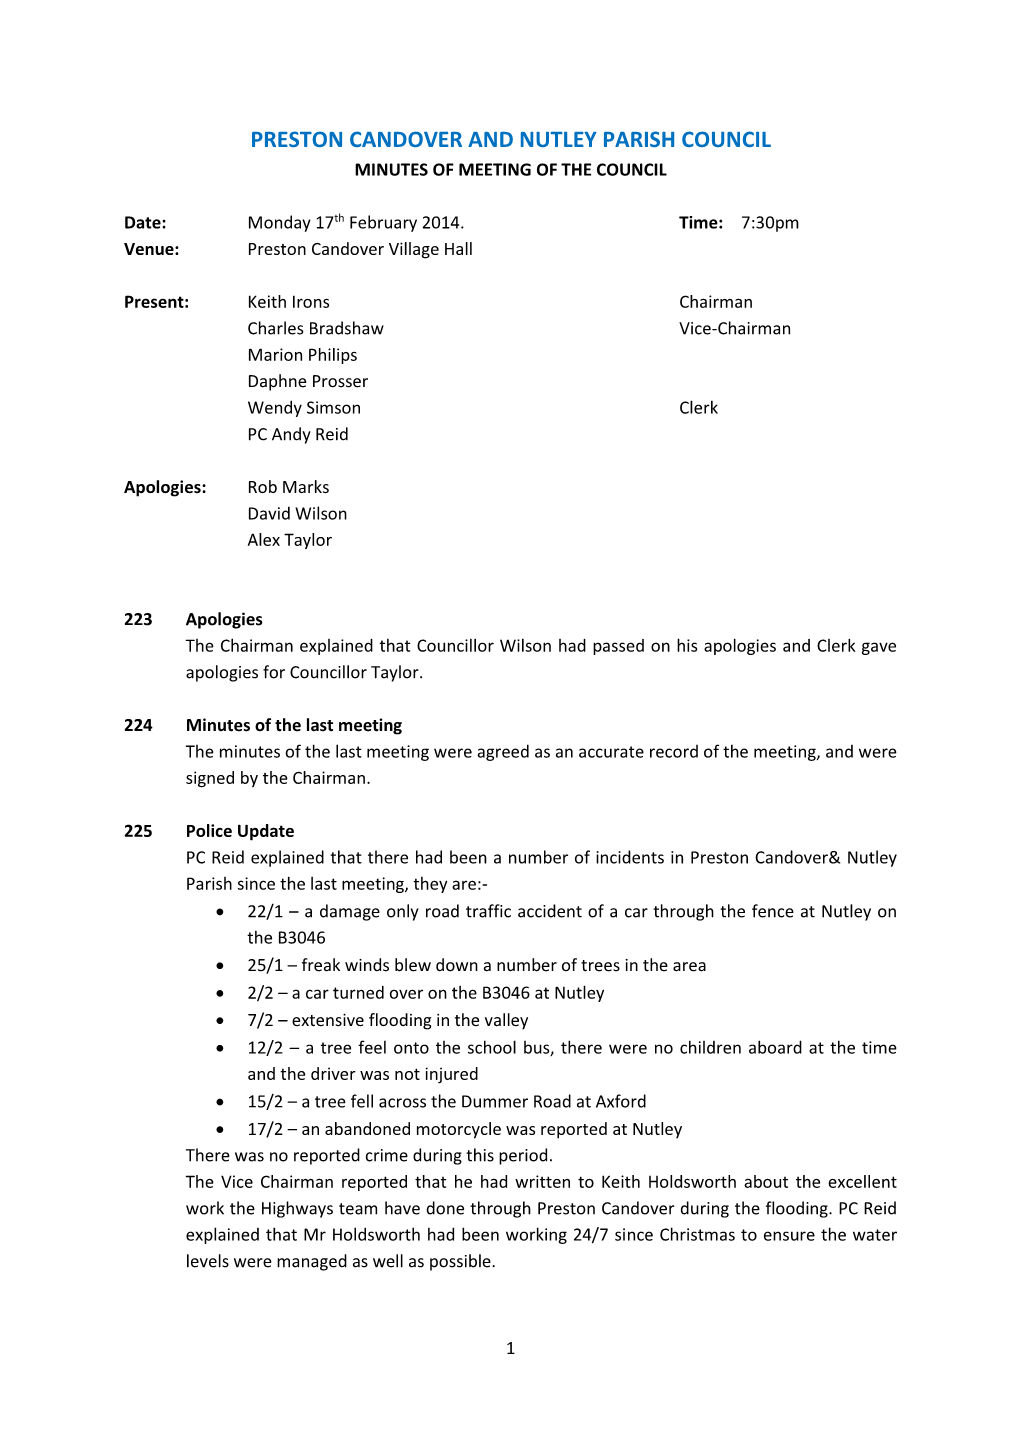 Preston Candover and Nutley Parish Council Minutes of Meeting of the Council